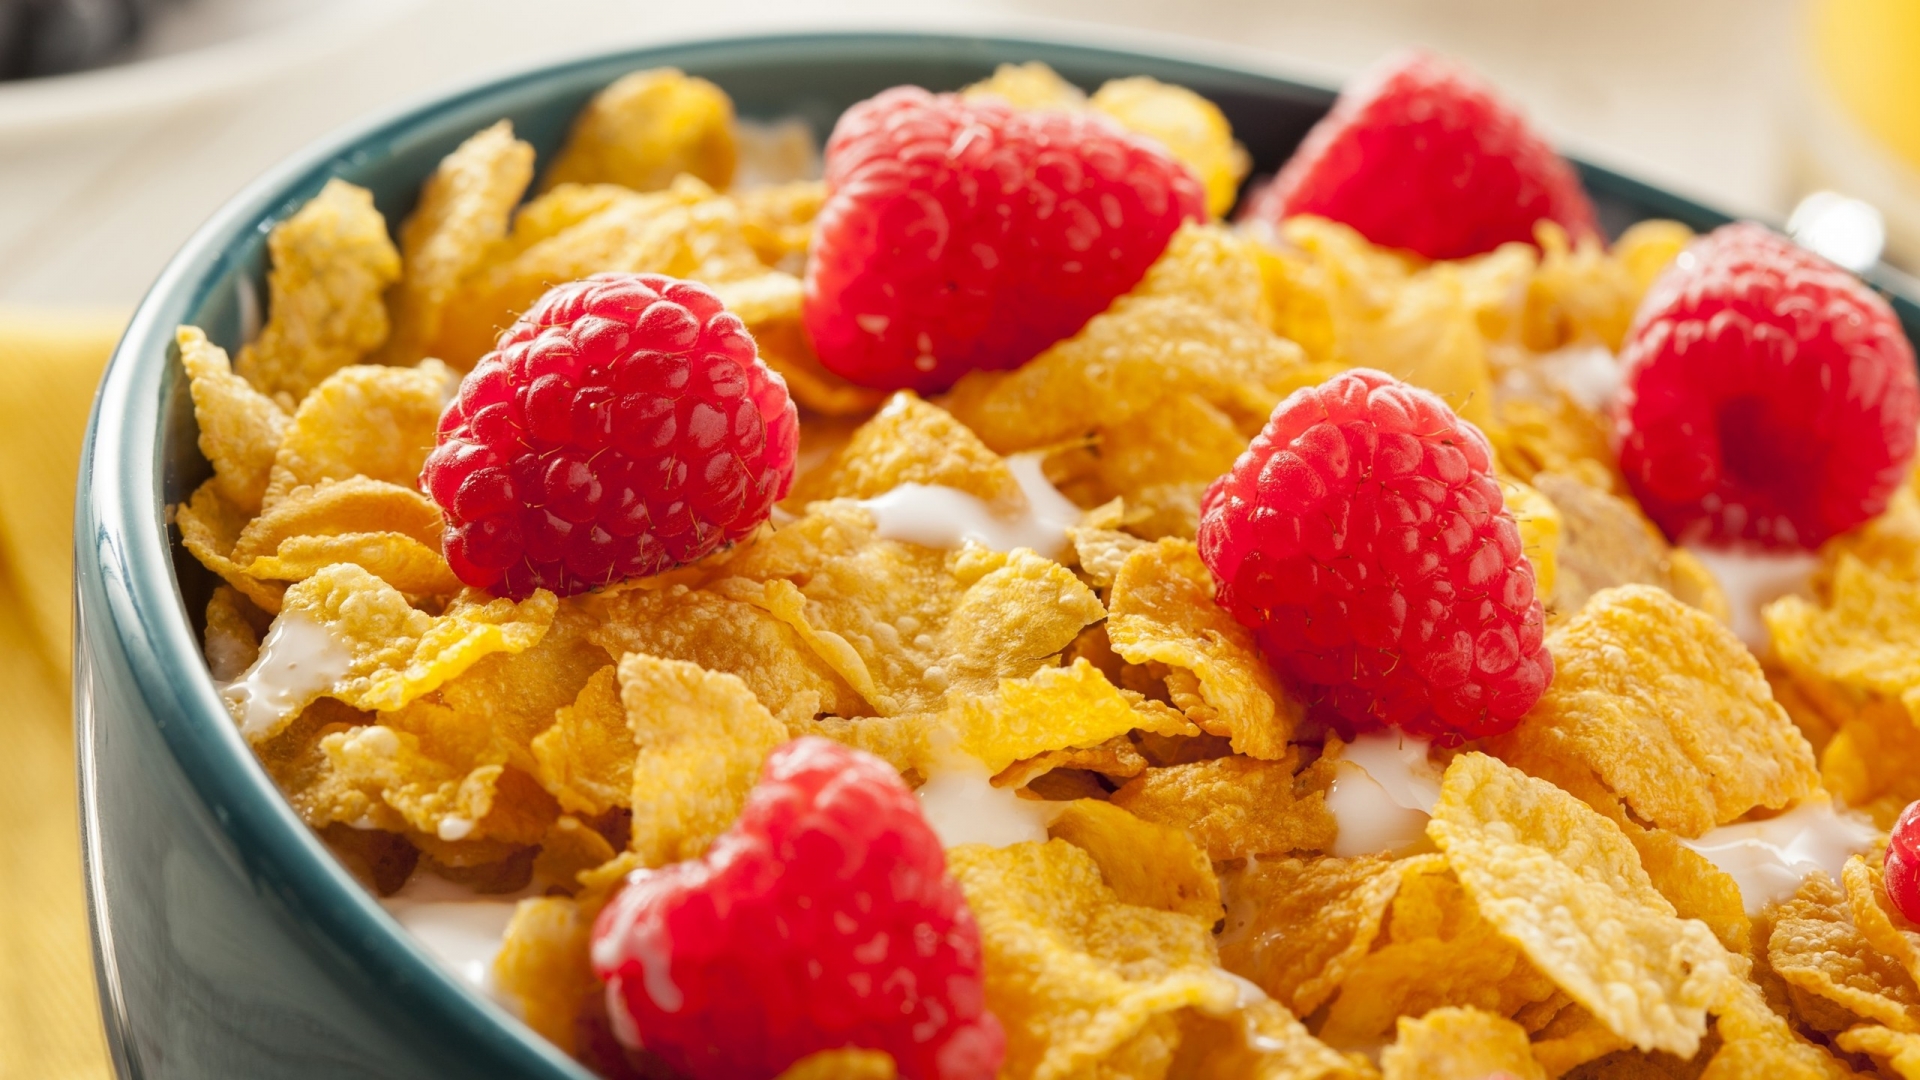 Cereals with Raspberries  for 1920 x 1080 HDTV 1080p resolution